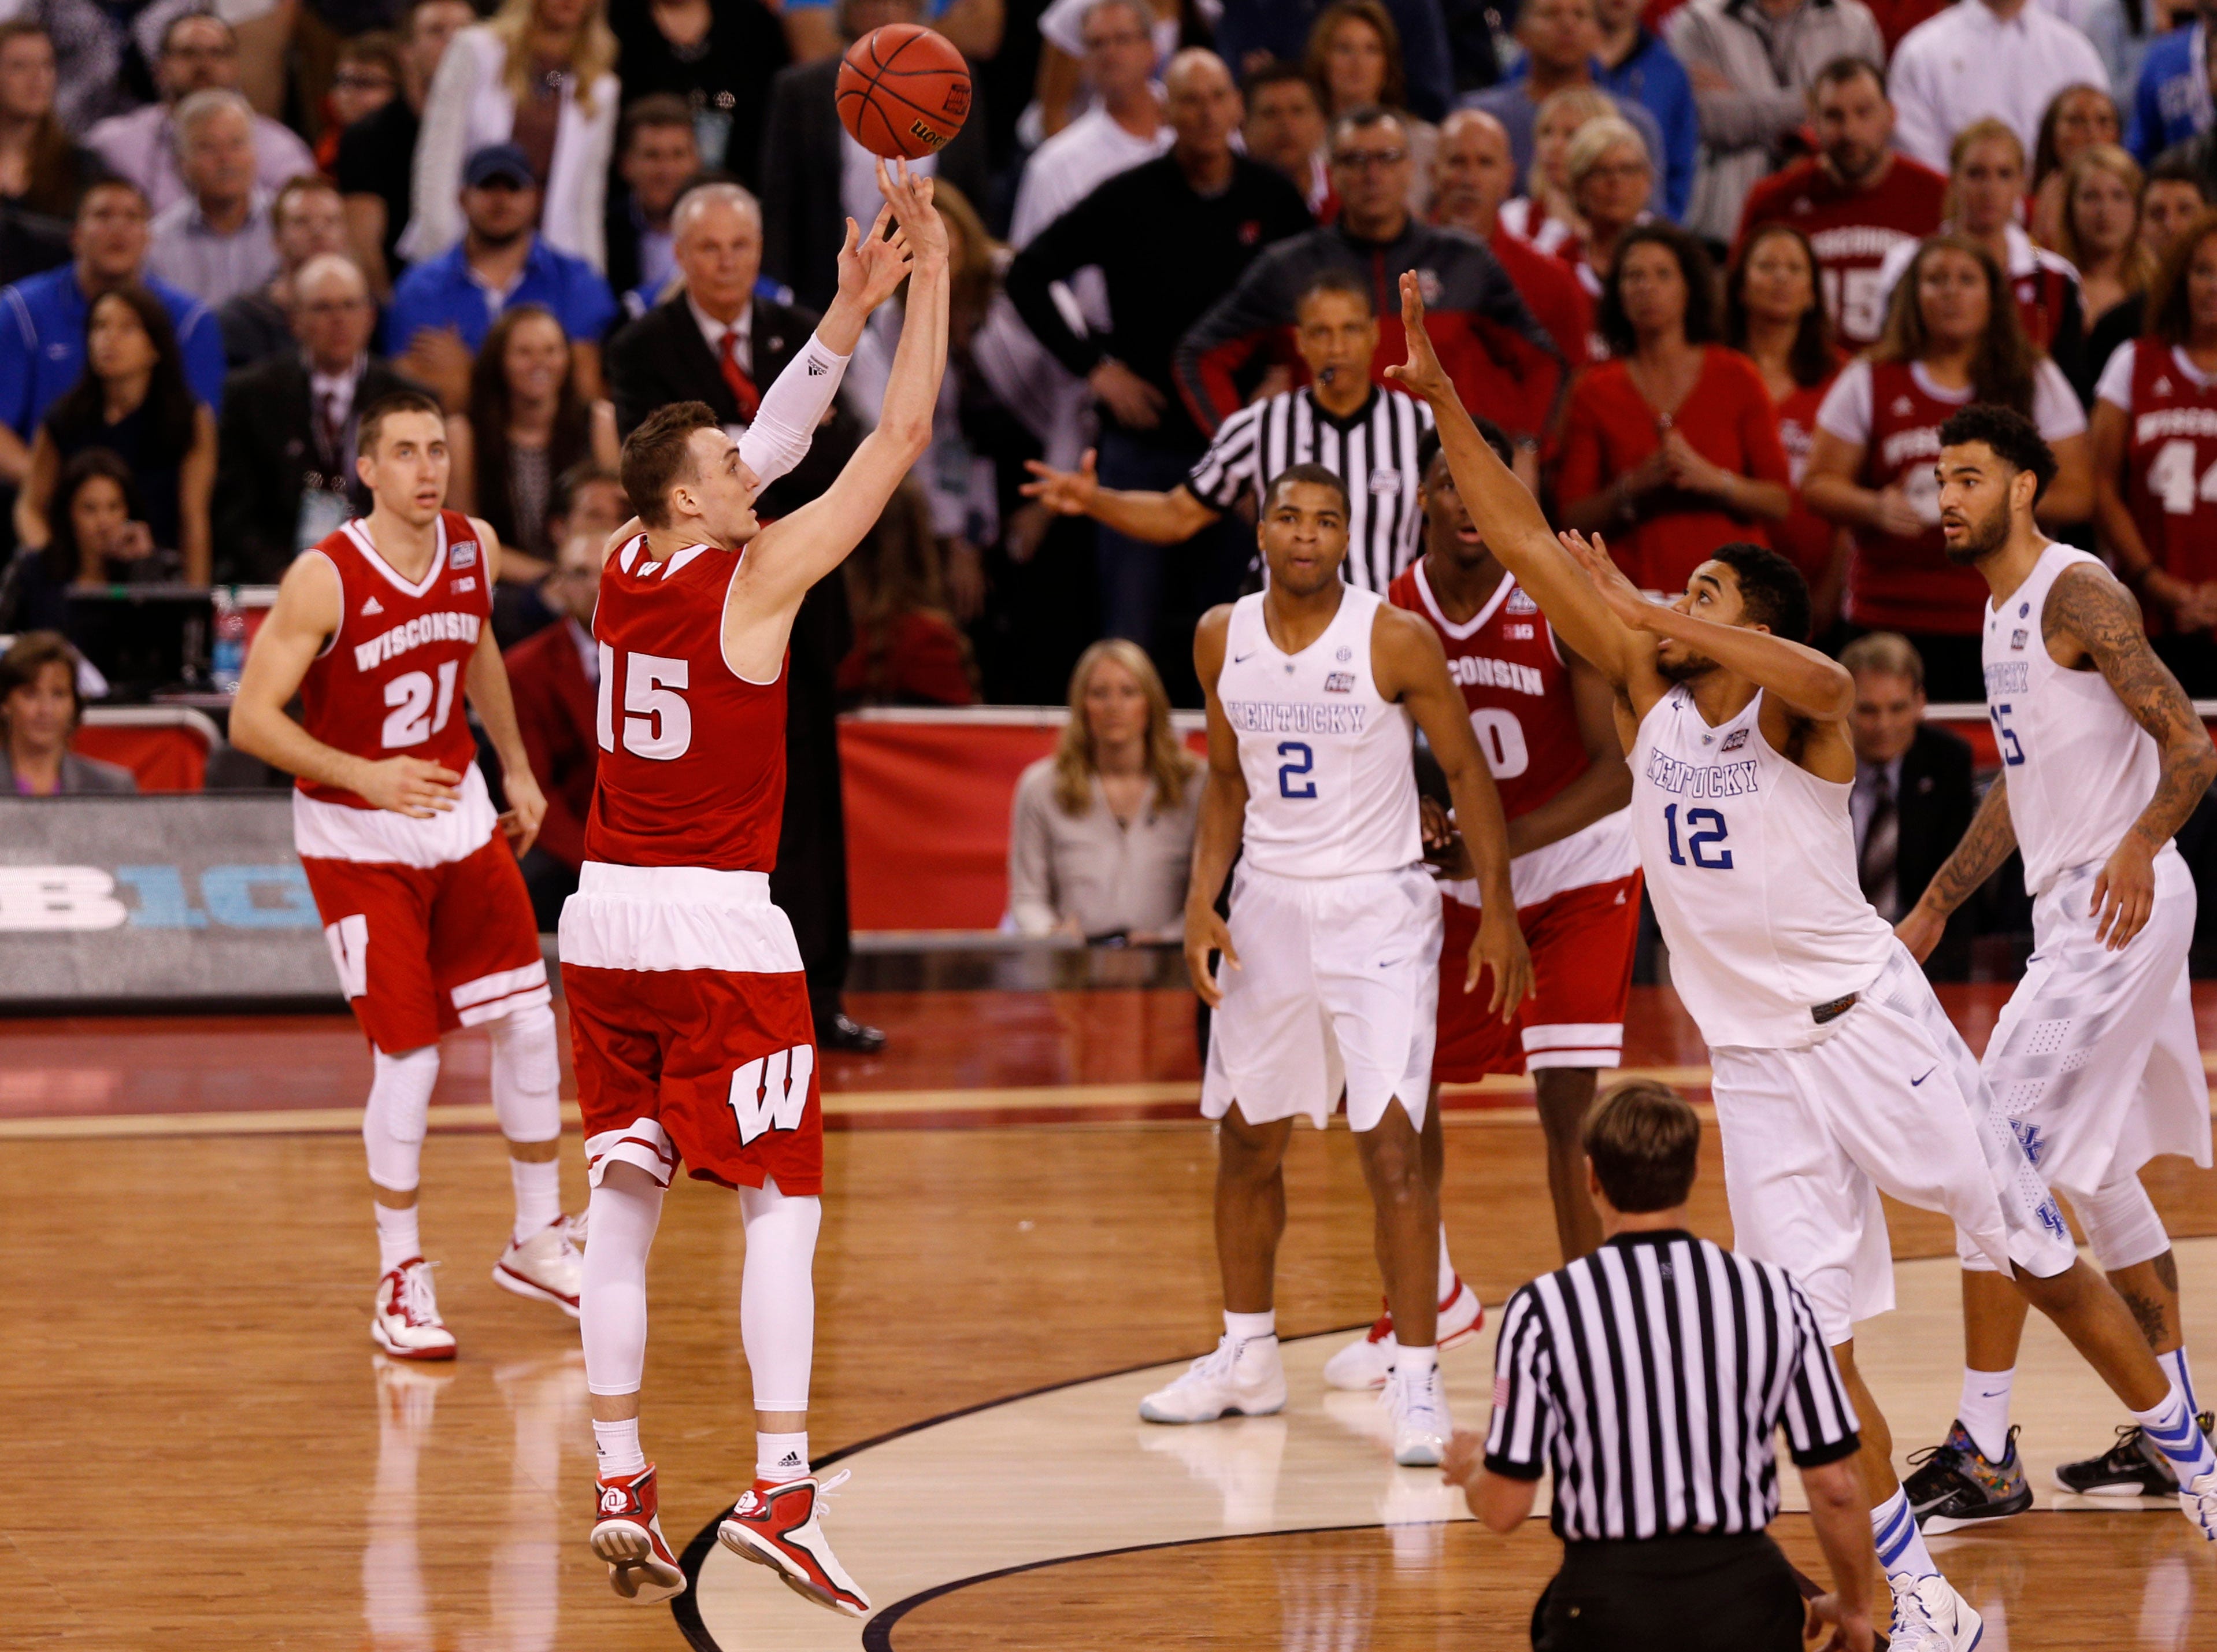 Wisconsin's Sam Dekker hits a 3-point shot to give the Badgers the lead late against Kentucky in the 2015 national semifinal.